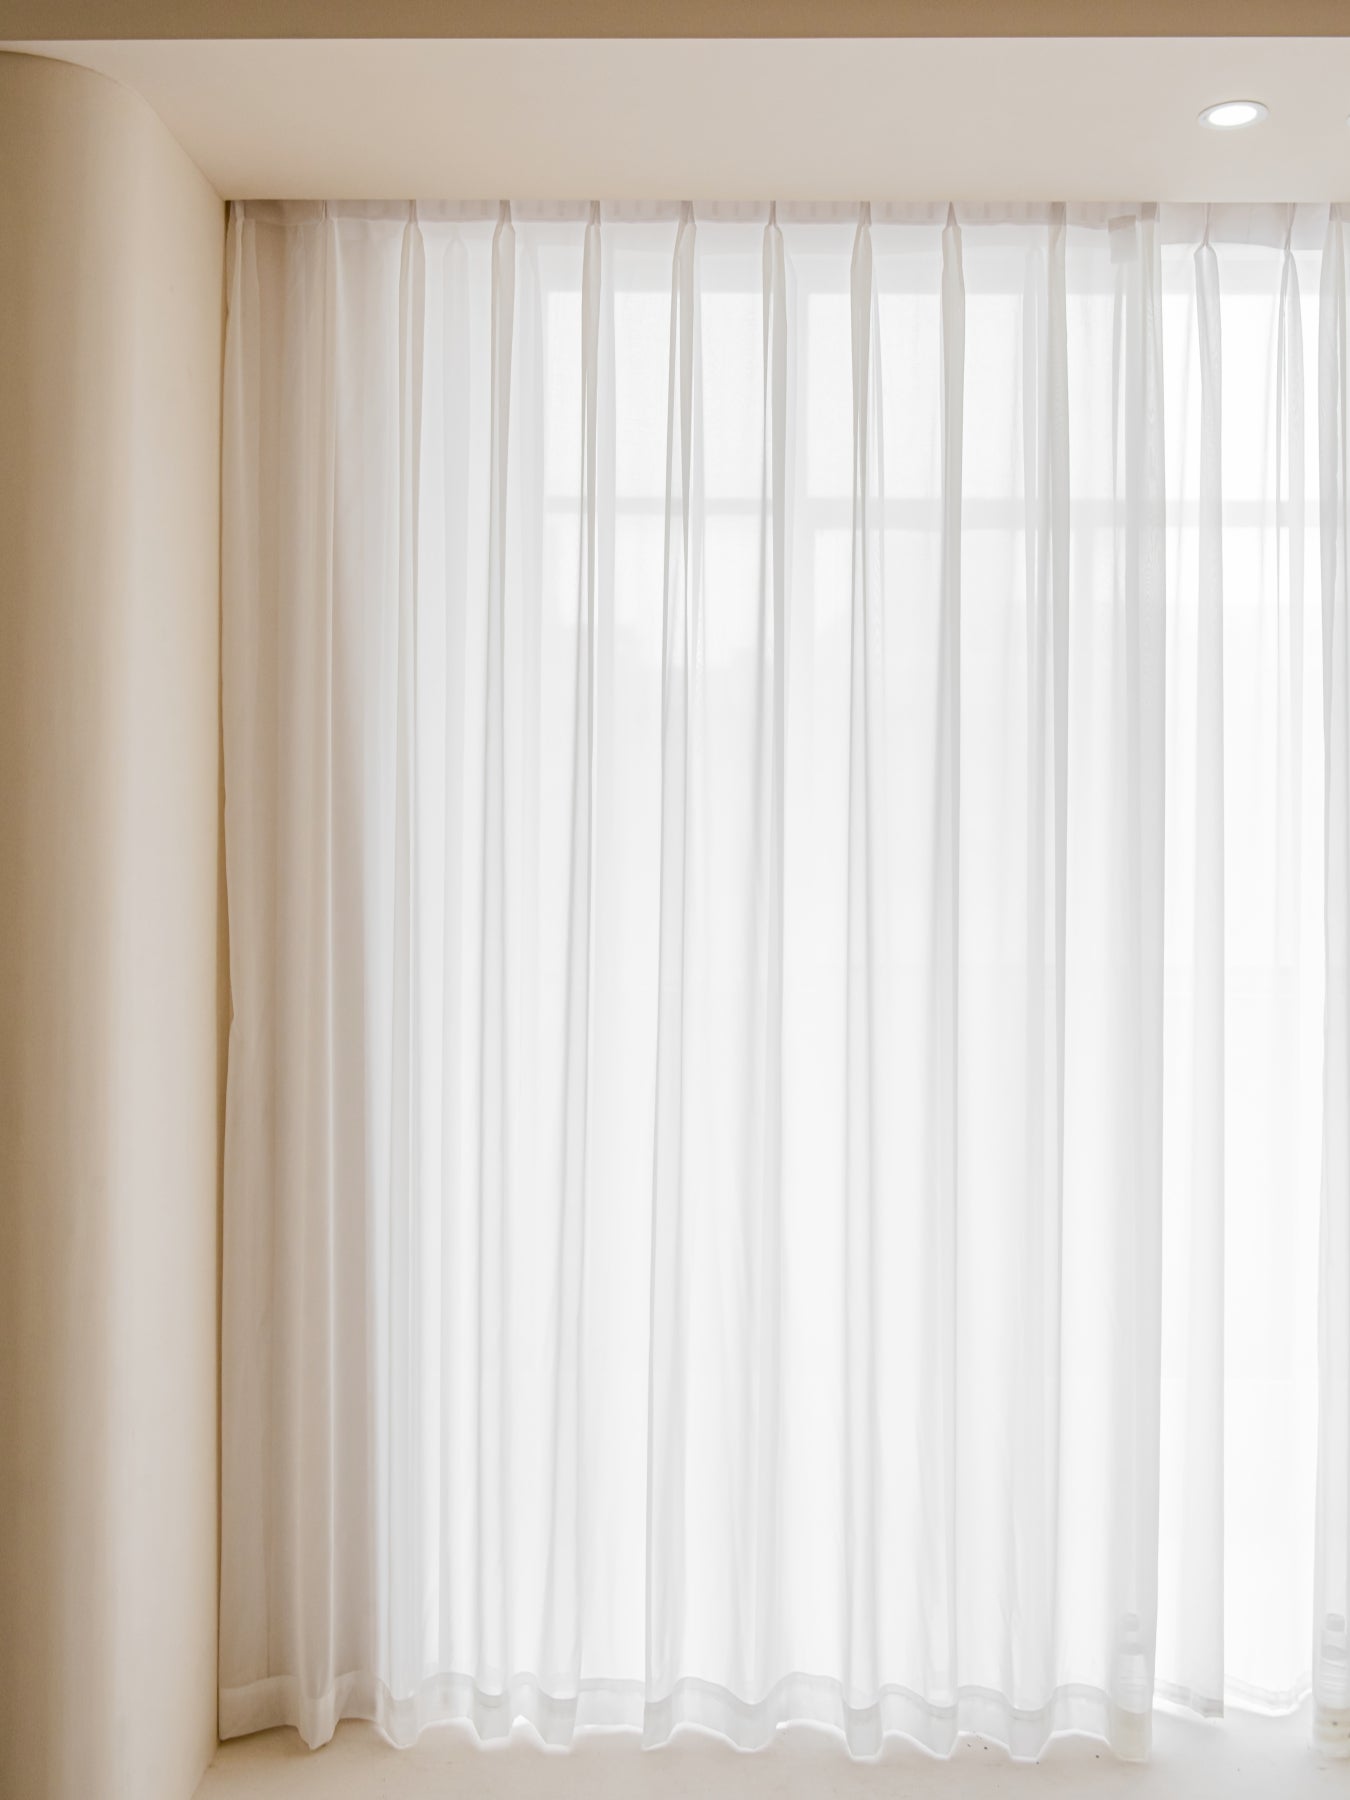 Cream Gauze Sheer Curtains from EaseEase providing delicate light filter in a serene room setting, embodying ethereal elegance and exceptional craftsmanship